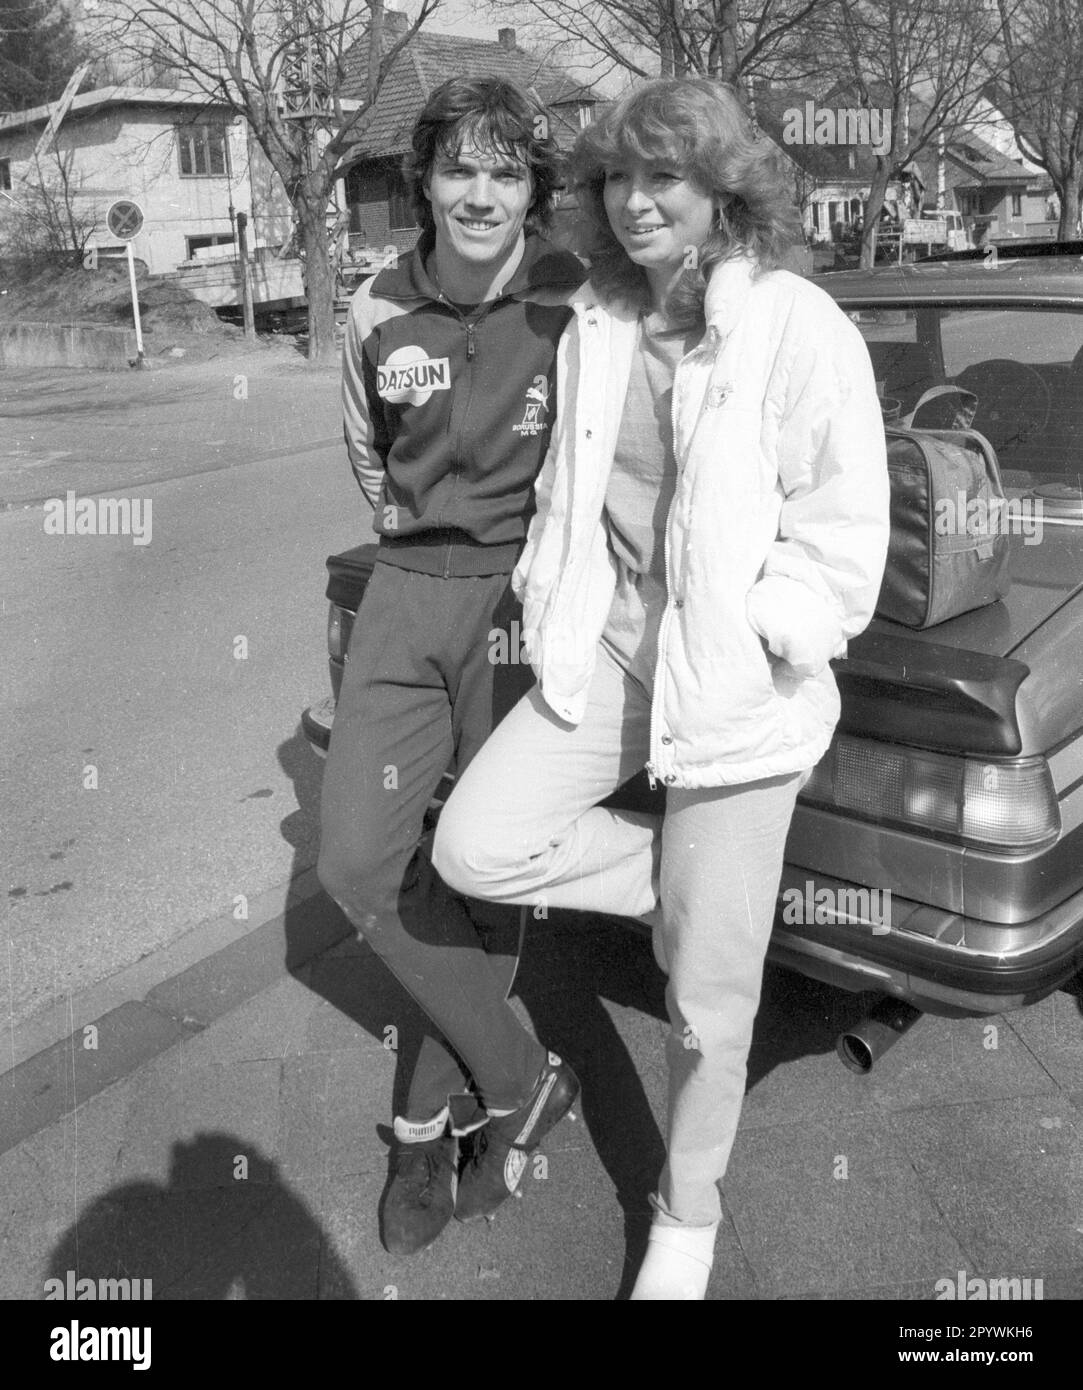 Lothar Matthäus (Borussia Mönchengladbach) with wife Silvia 02.04.1982. Only for journalistic use! Only for editorial use! [automated translation] Stock Photo